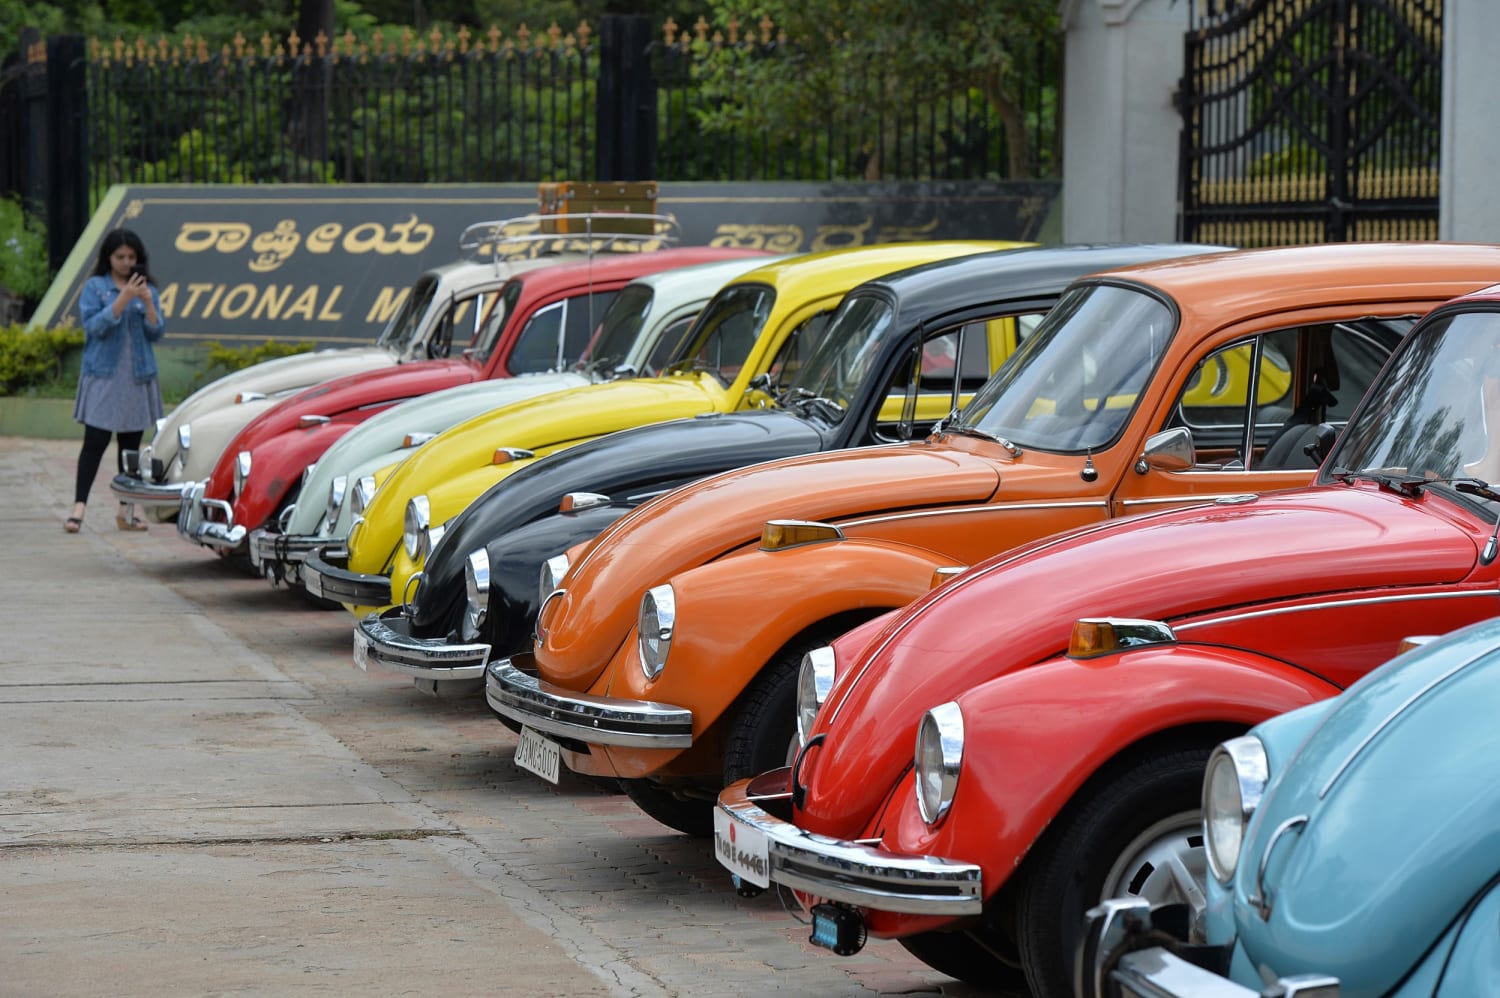 Volkswagen Squashes The Beetle End Of The Line For The Iconic Bug